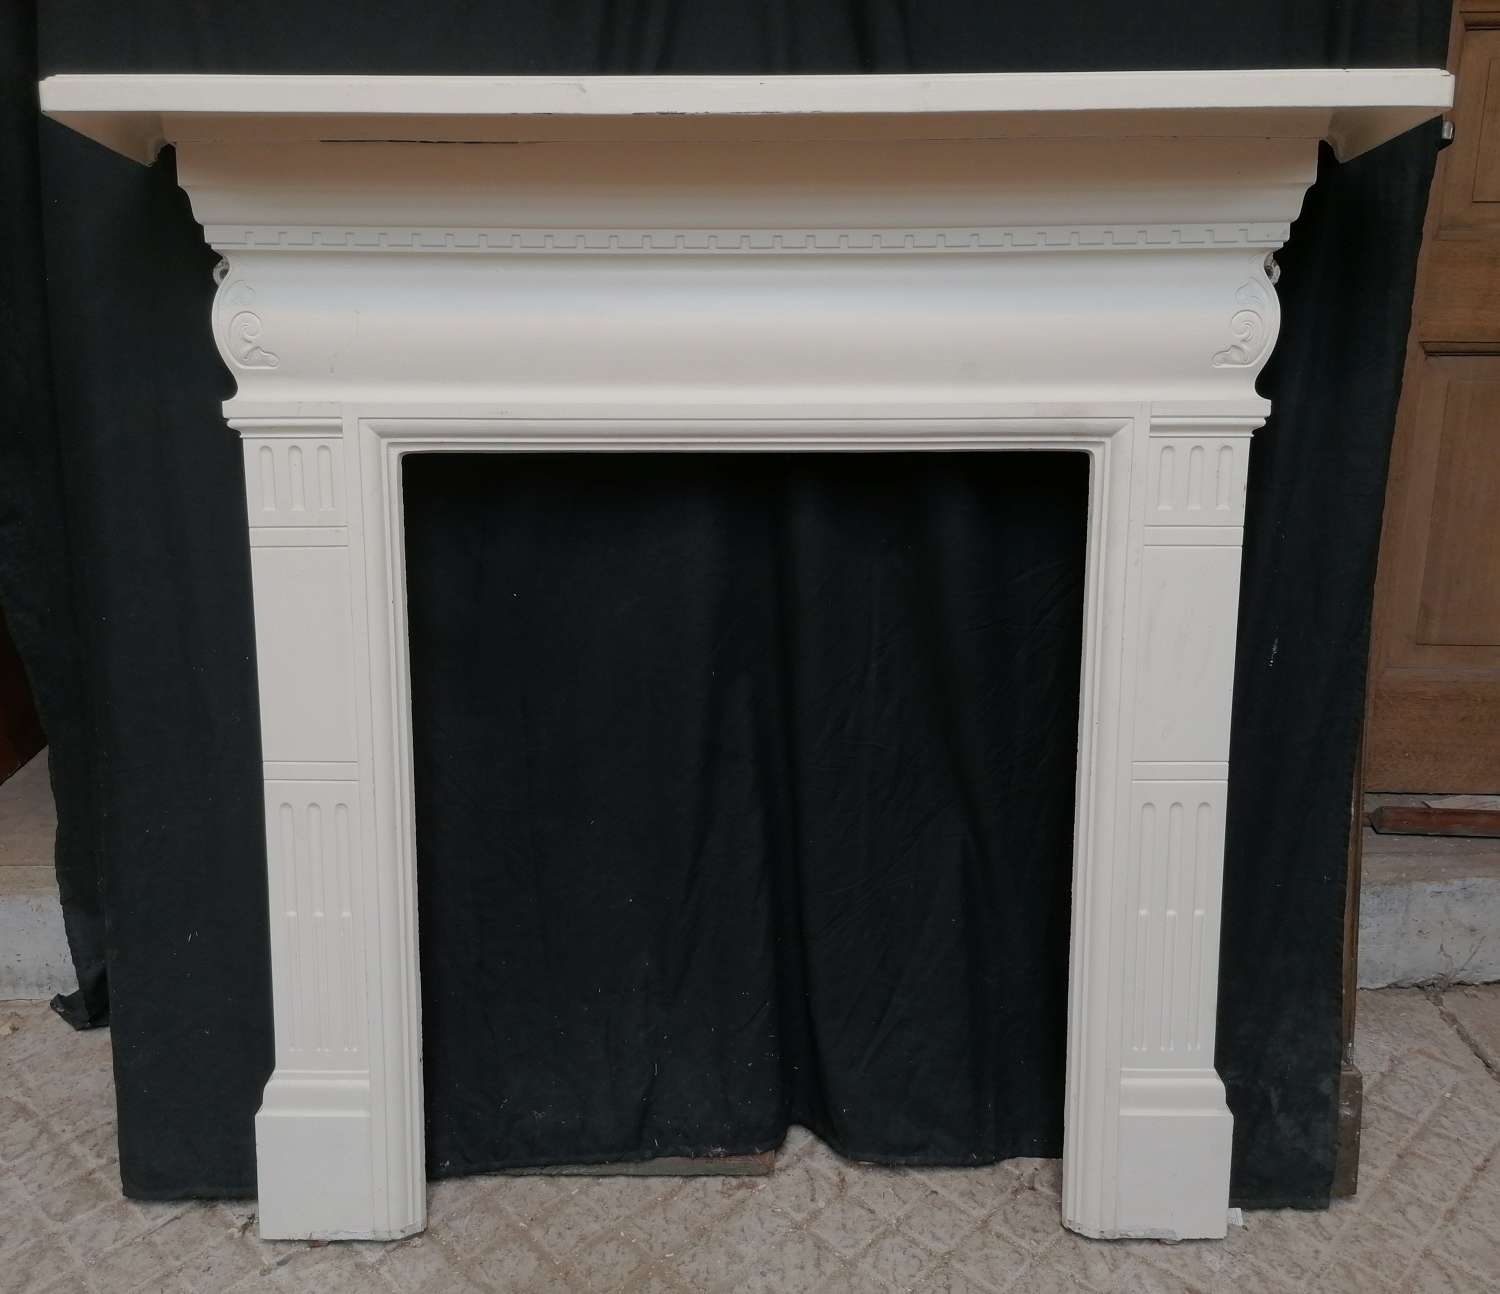 FS0154 A LARGE ANTIQUE RECLAIMED PAINTED CAST IRON FIRE SURROUND